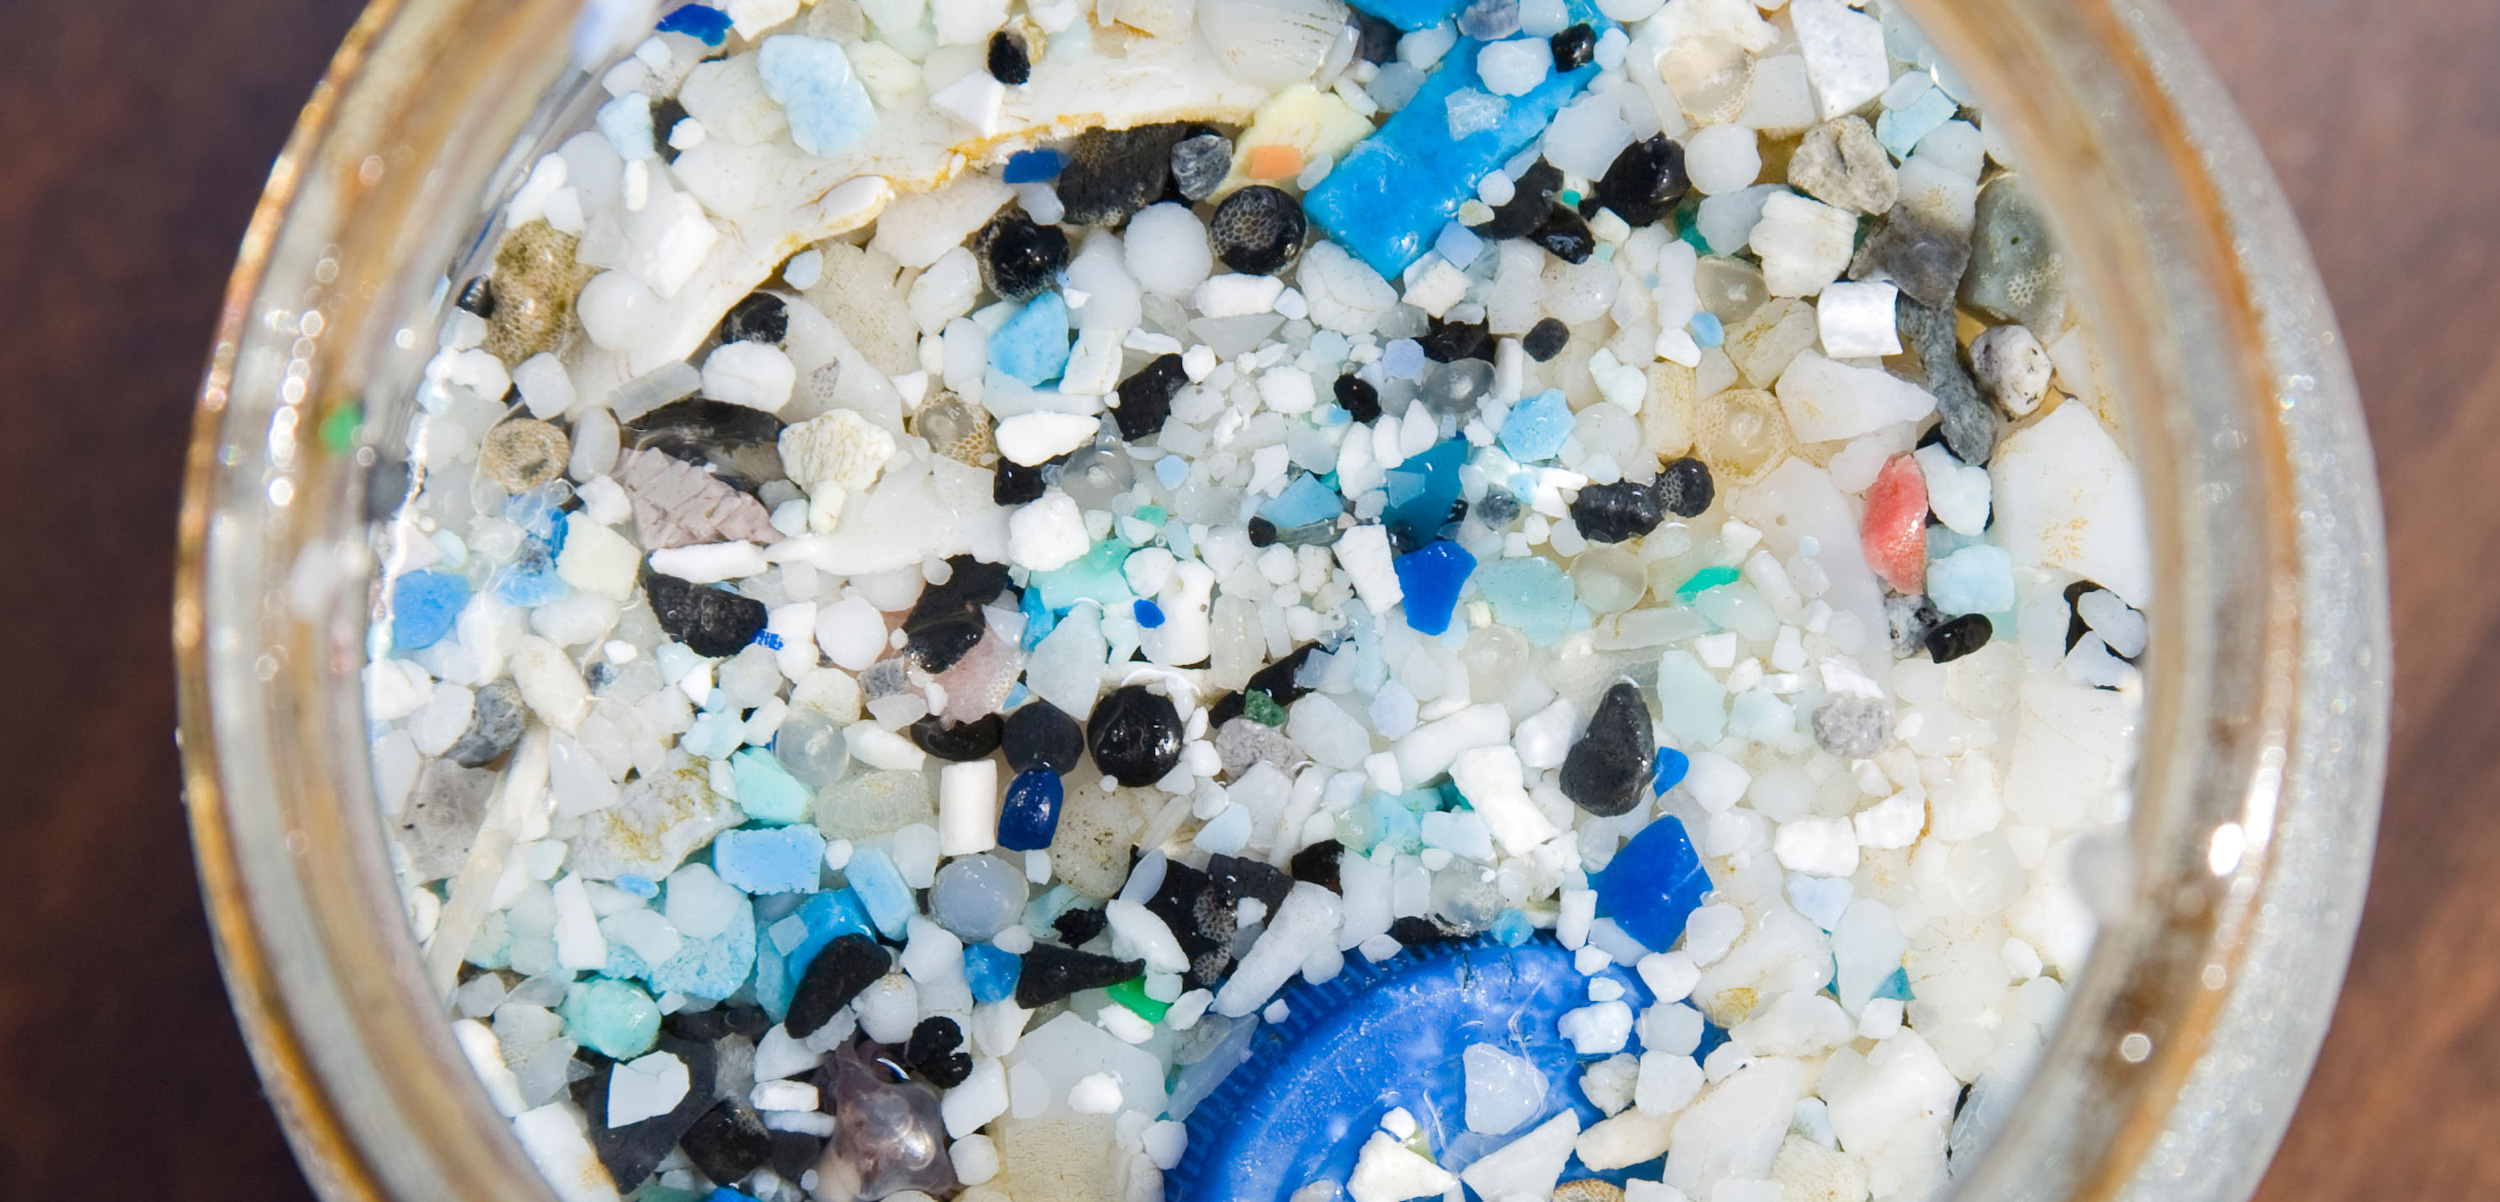 In the ocean, even tiny pieces of plastic can host microbial life. Scientists hope to use observations on how microbial communities develop to estimate how long a microplastic fragment has been floating in the ocean. Photo by Citizen of the Planet/Alamy Stock Photo